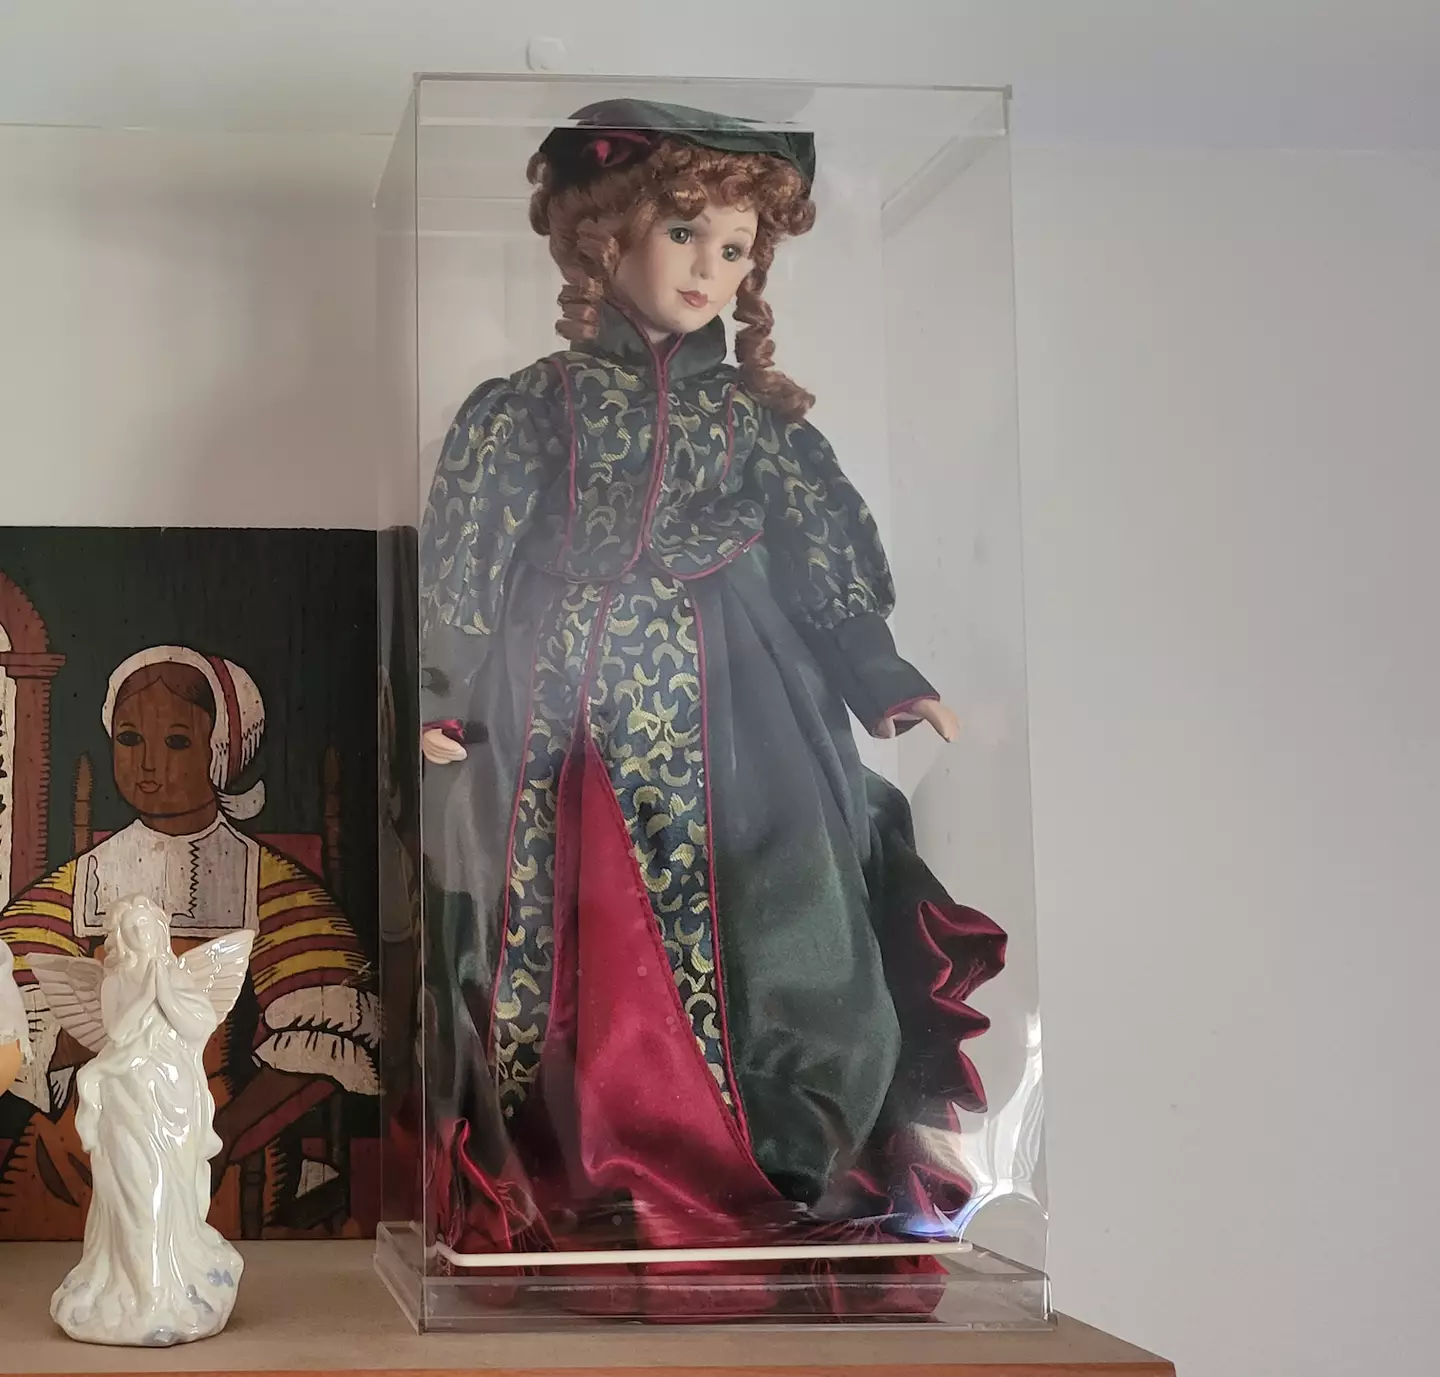 The allegedly demonic doll is now blessed and kept in a see-through case.